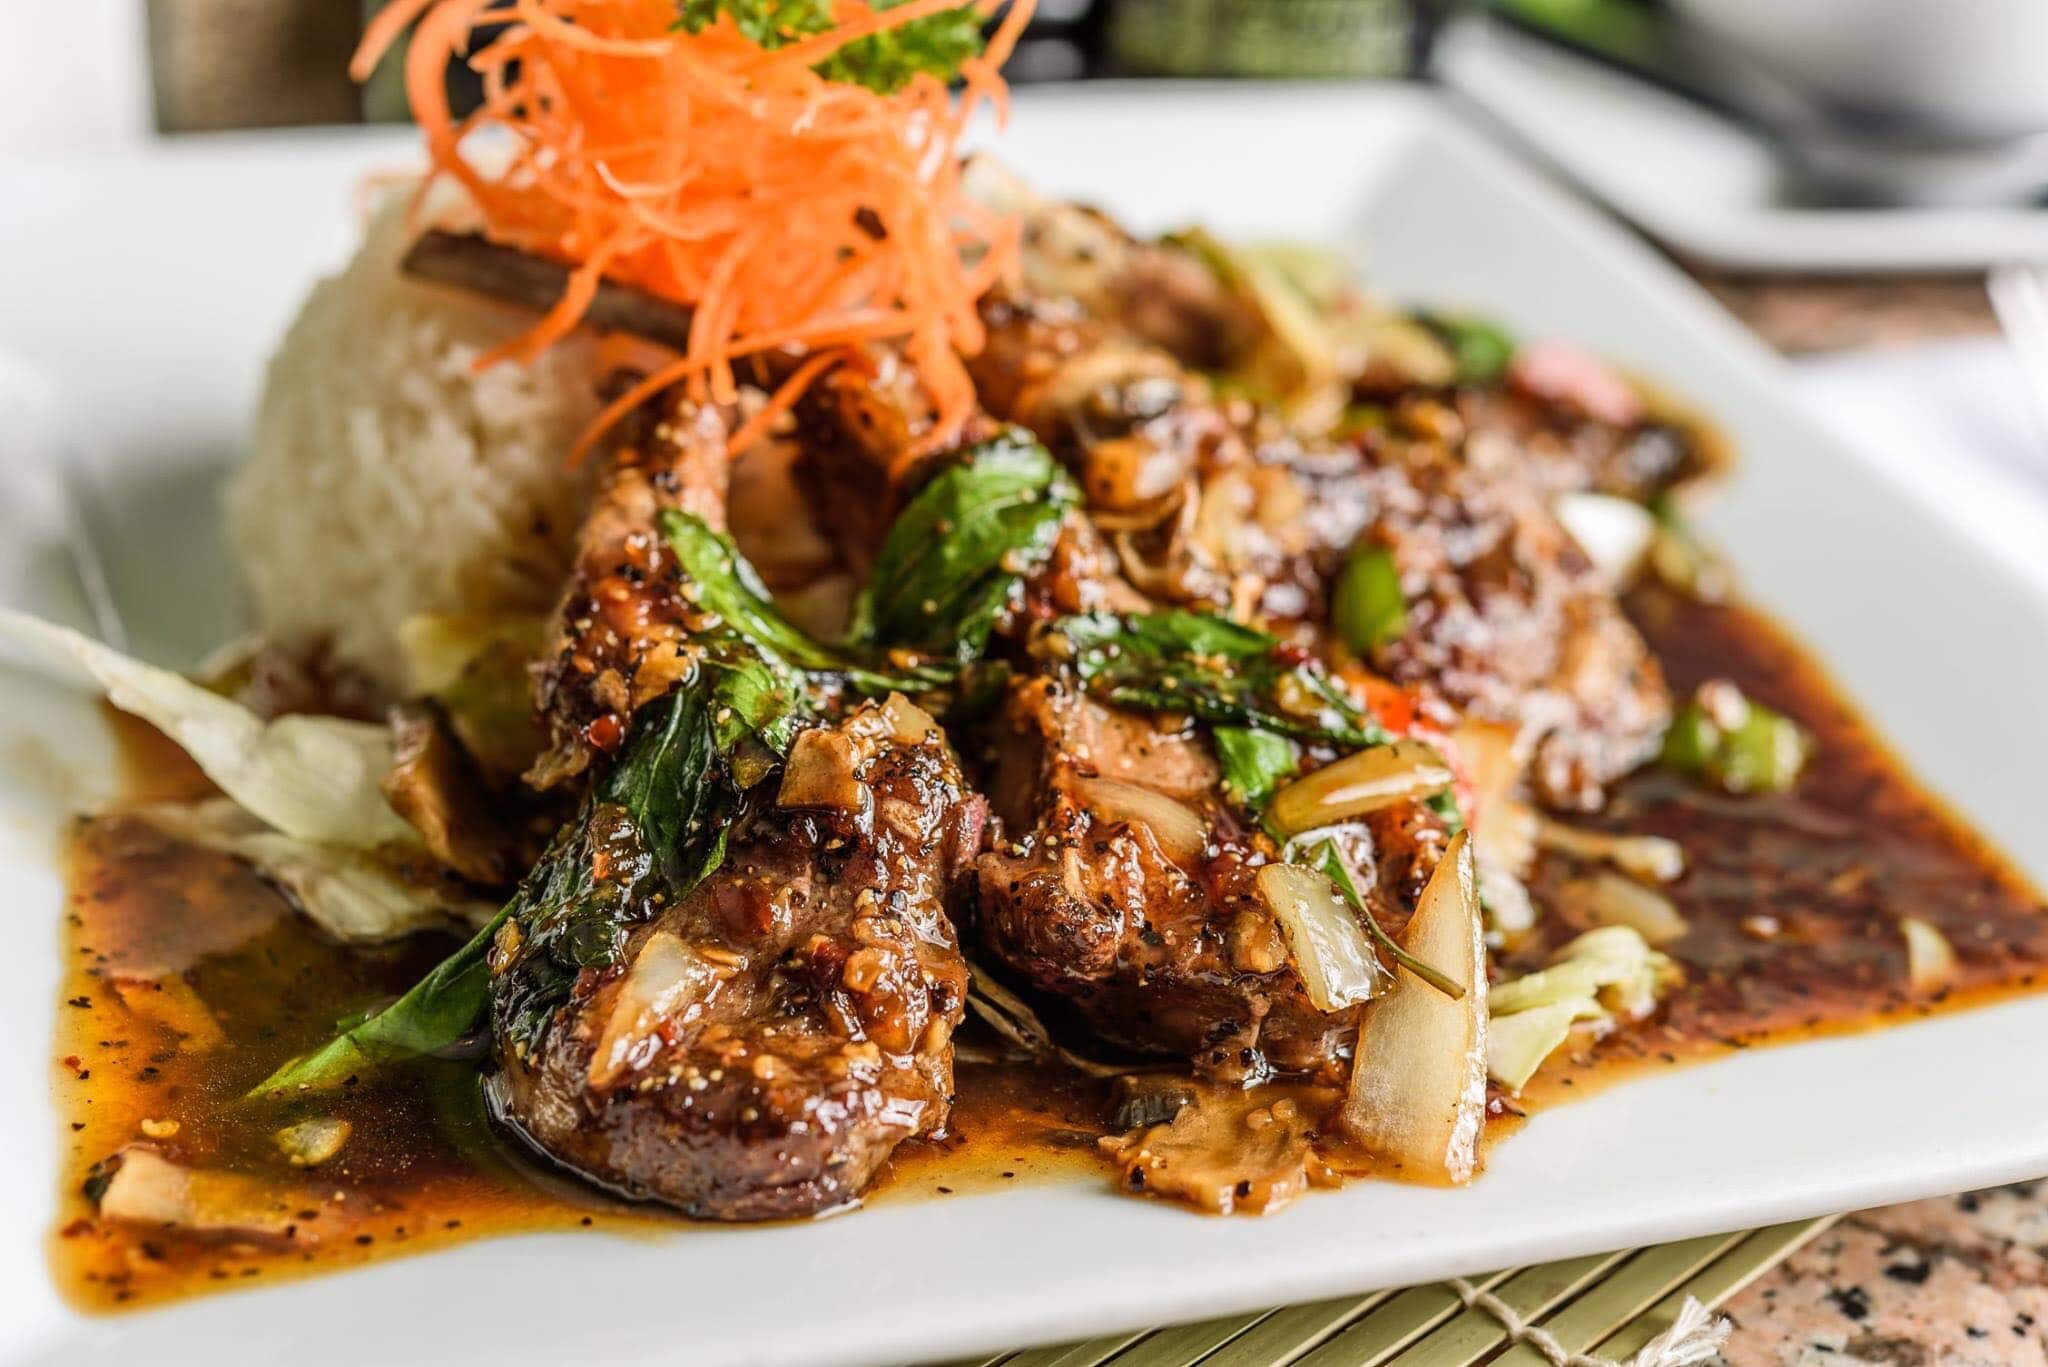 Bet you didn't know you could get Indonesian food at Nori Thai and Sushi